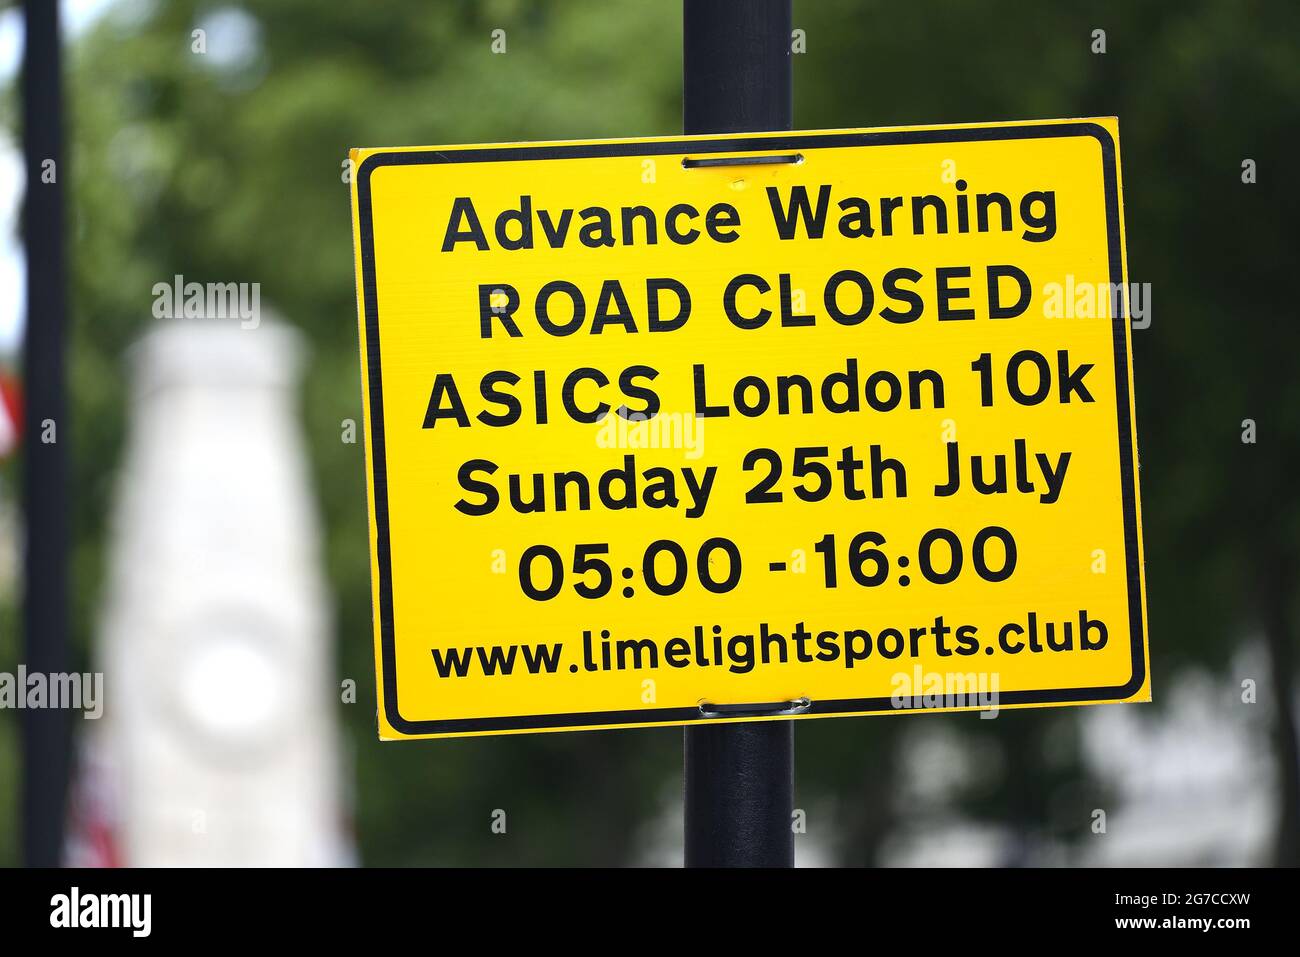 London, England, UK. Advanced warning of road closures in central London for a sporting event. Whitehall, July 2021 Stock Photo